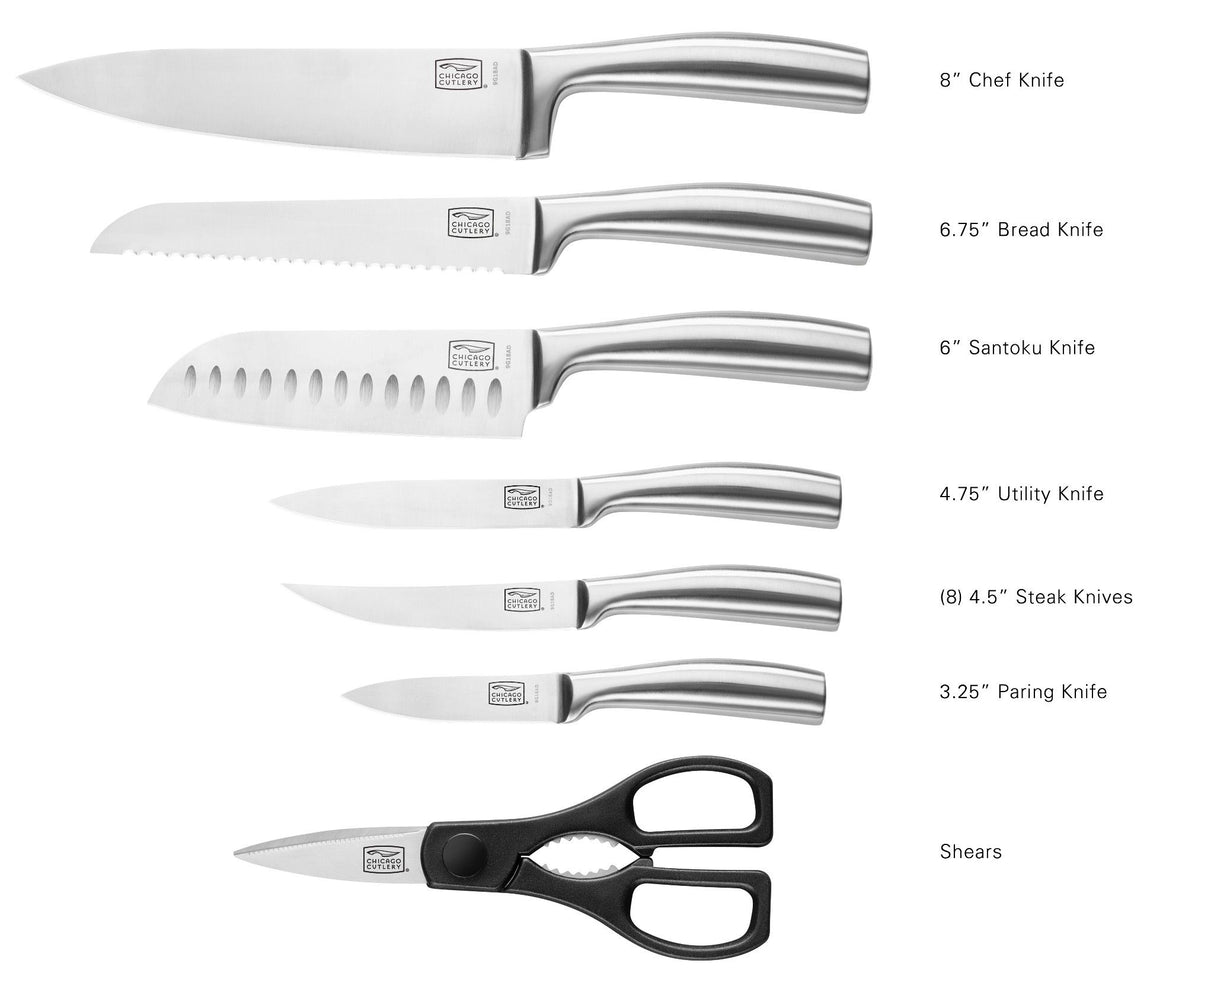  Malden™ knives and shears displayed individually with dimensions noted